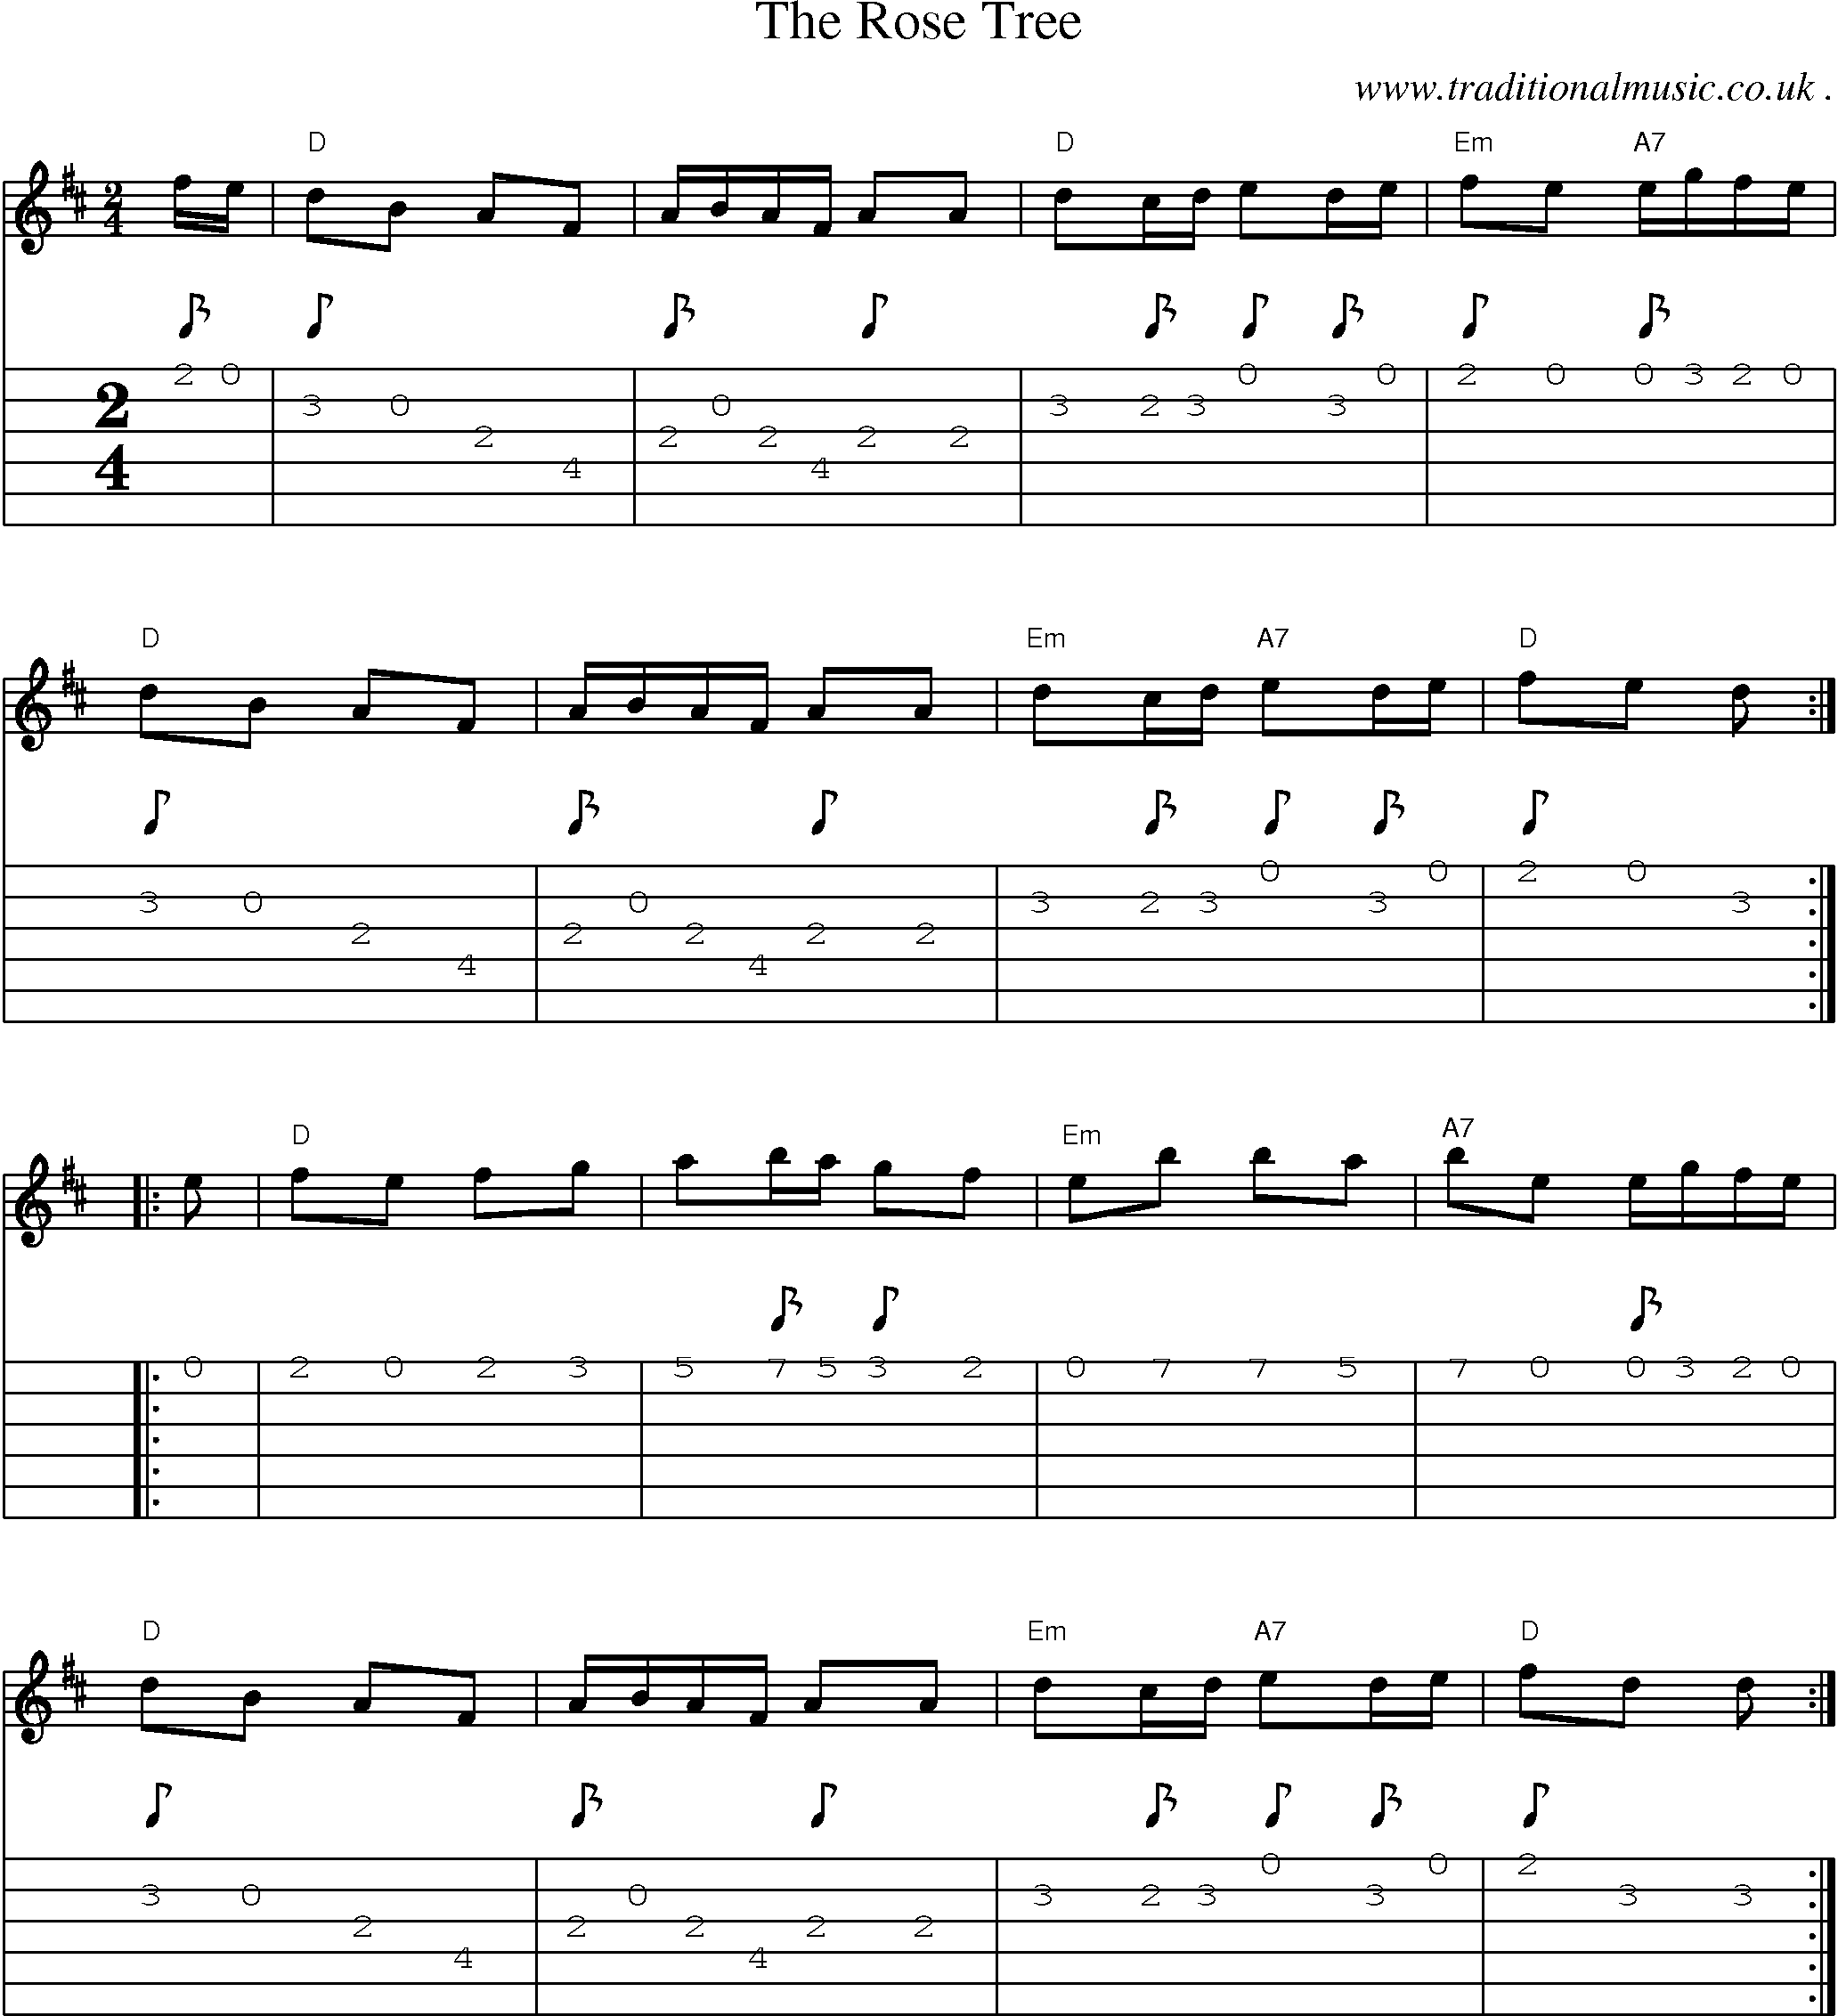 Music Score and Guitar Tabs for The Rose Tree